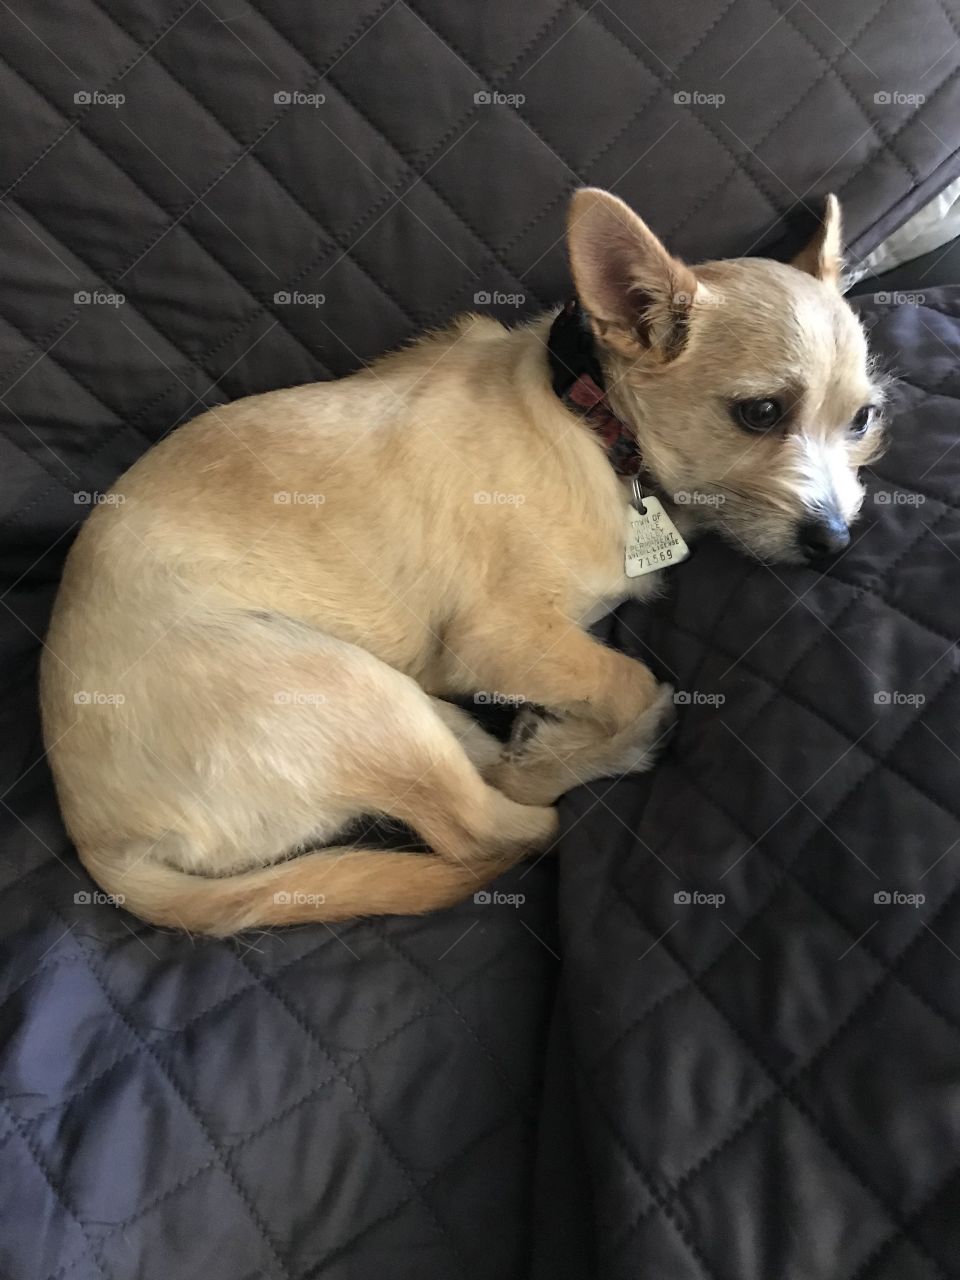 Cute dog, light colored mix between a chihuahua and a Yorkie is napping on a quilted blanket